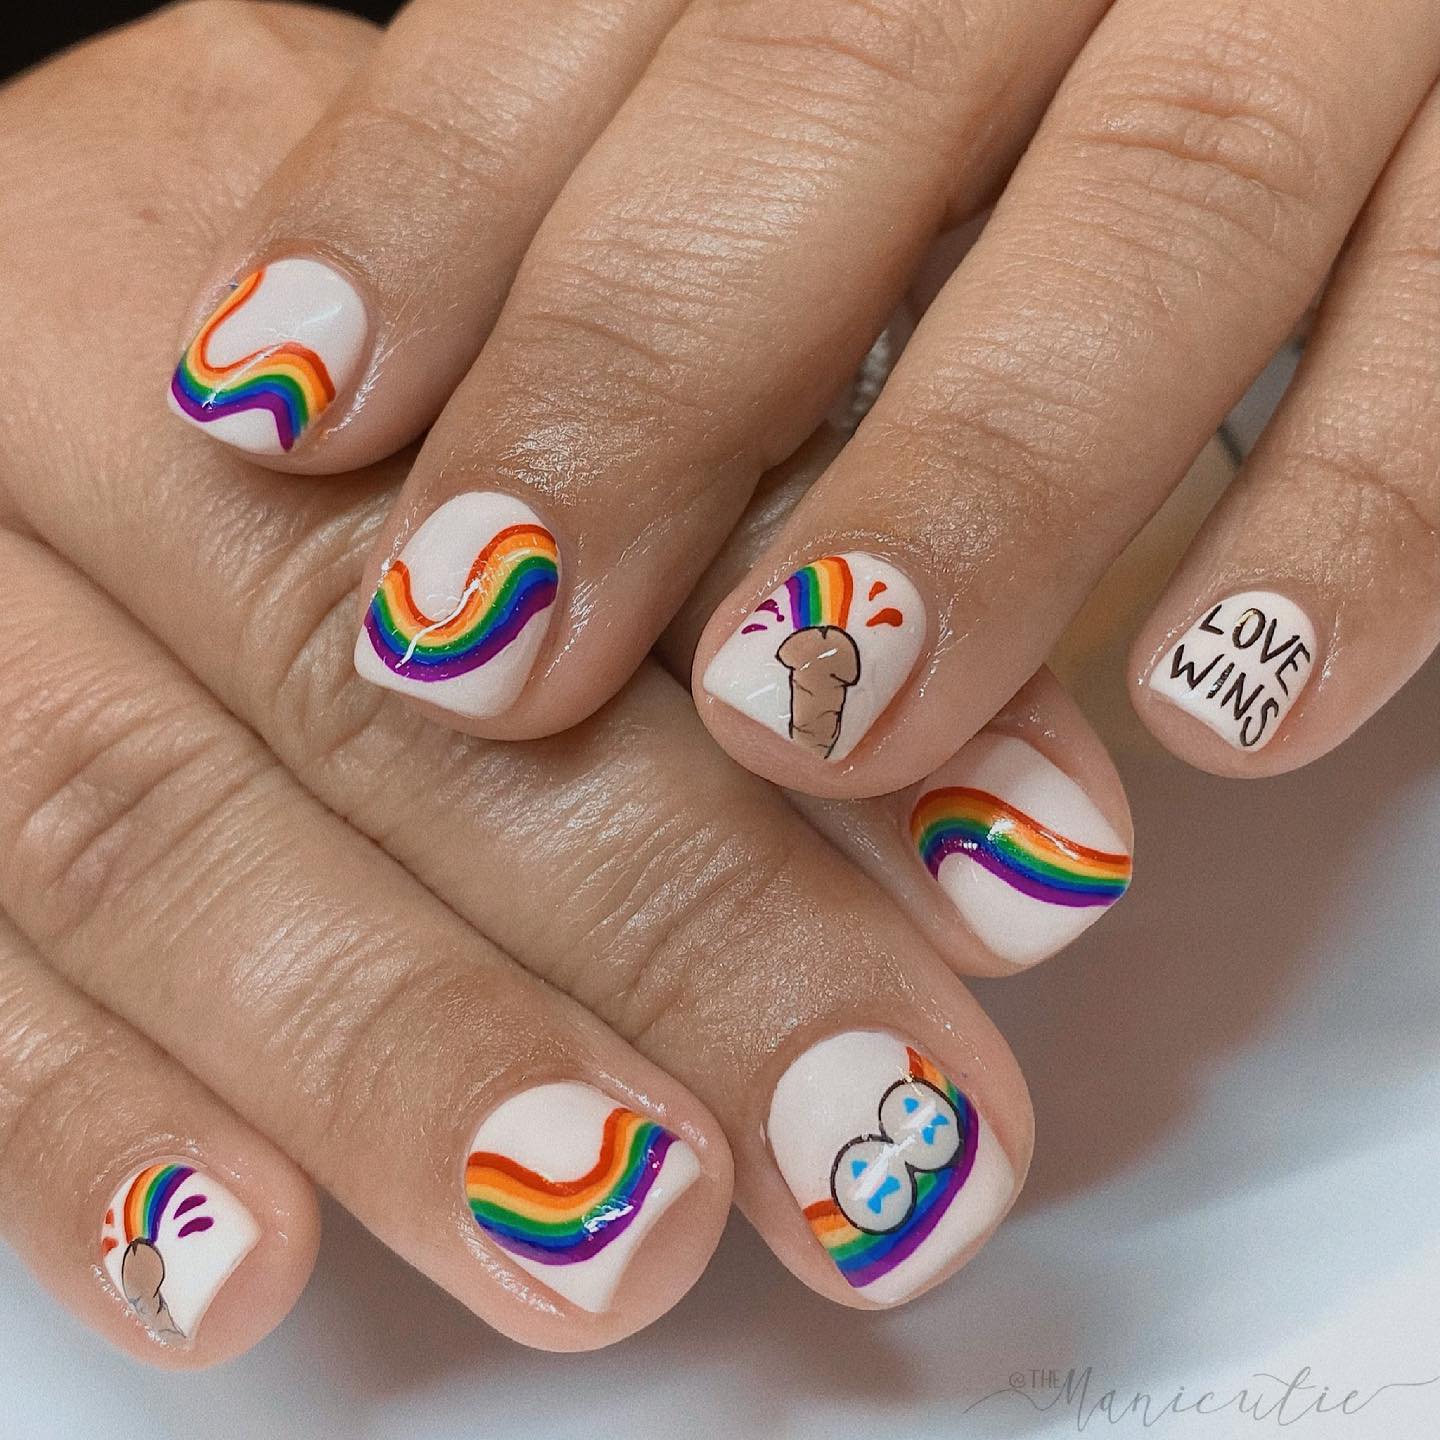 If you are looking for a nail art for the Pride, here is a perfect idea for you. Penises spouting a rainbow look cool.